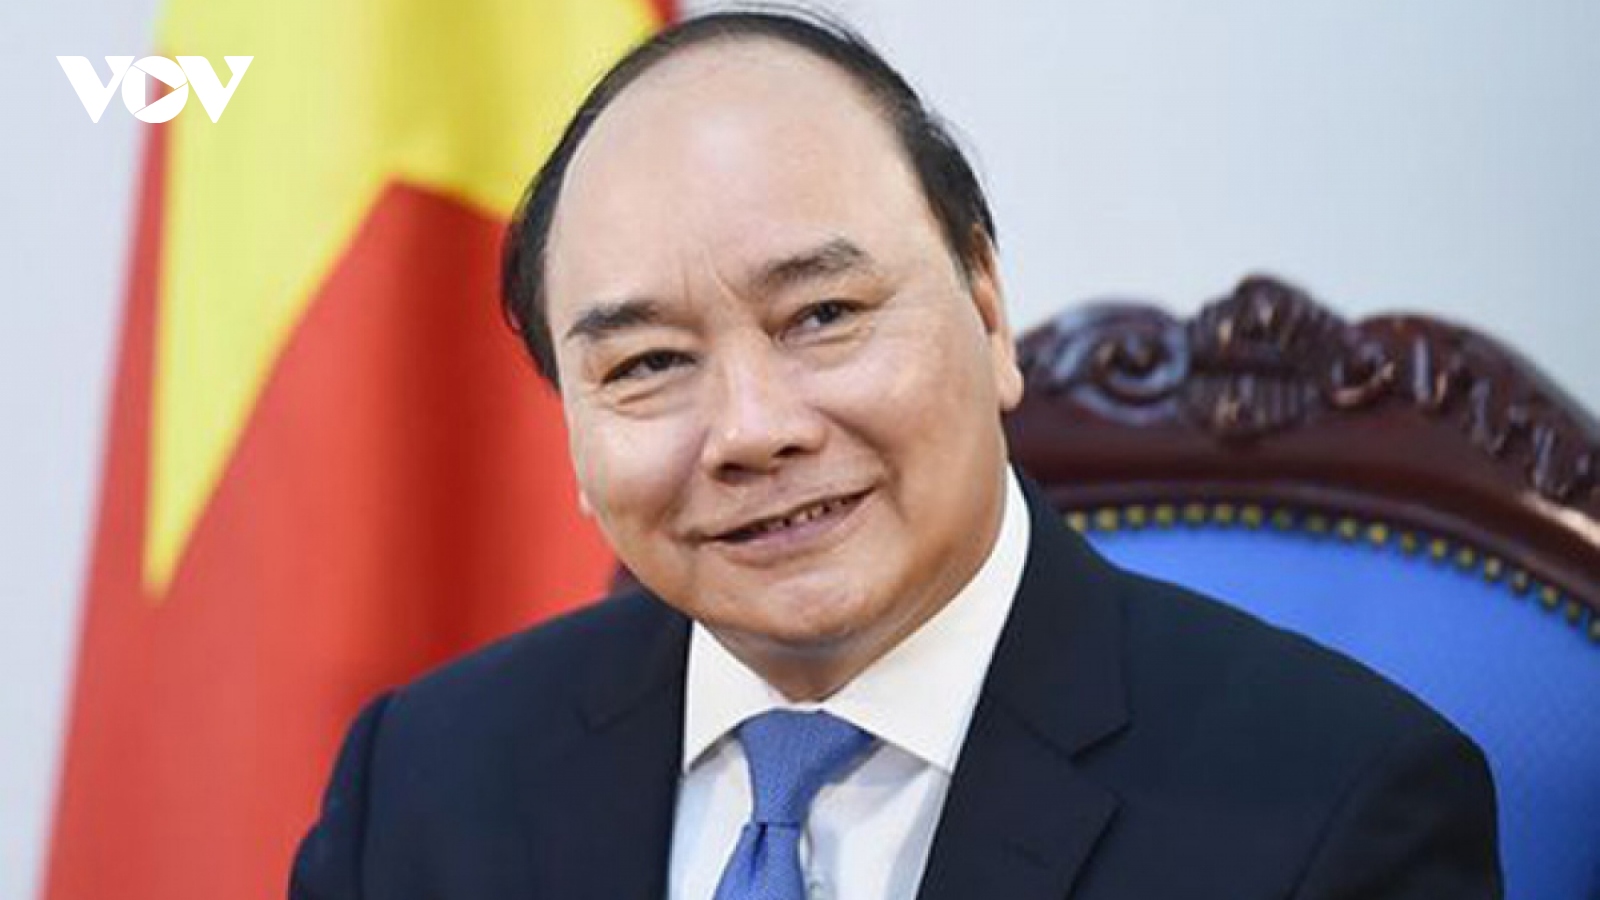 President Phuc’s state visit to propel Vietnam-Indonesia relations forward